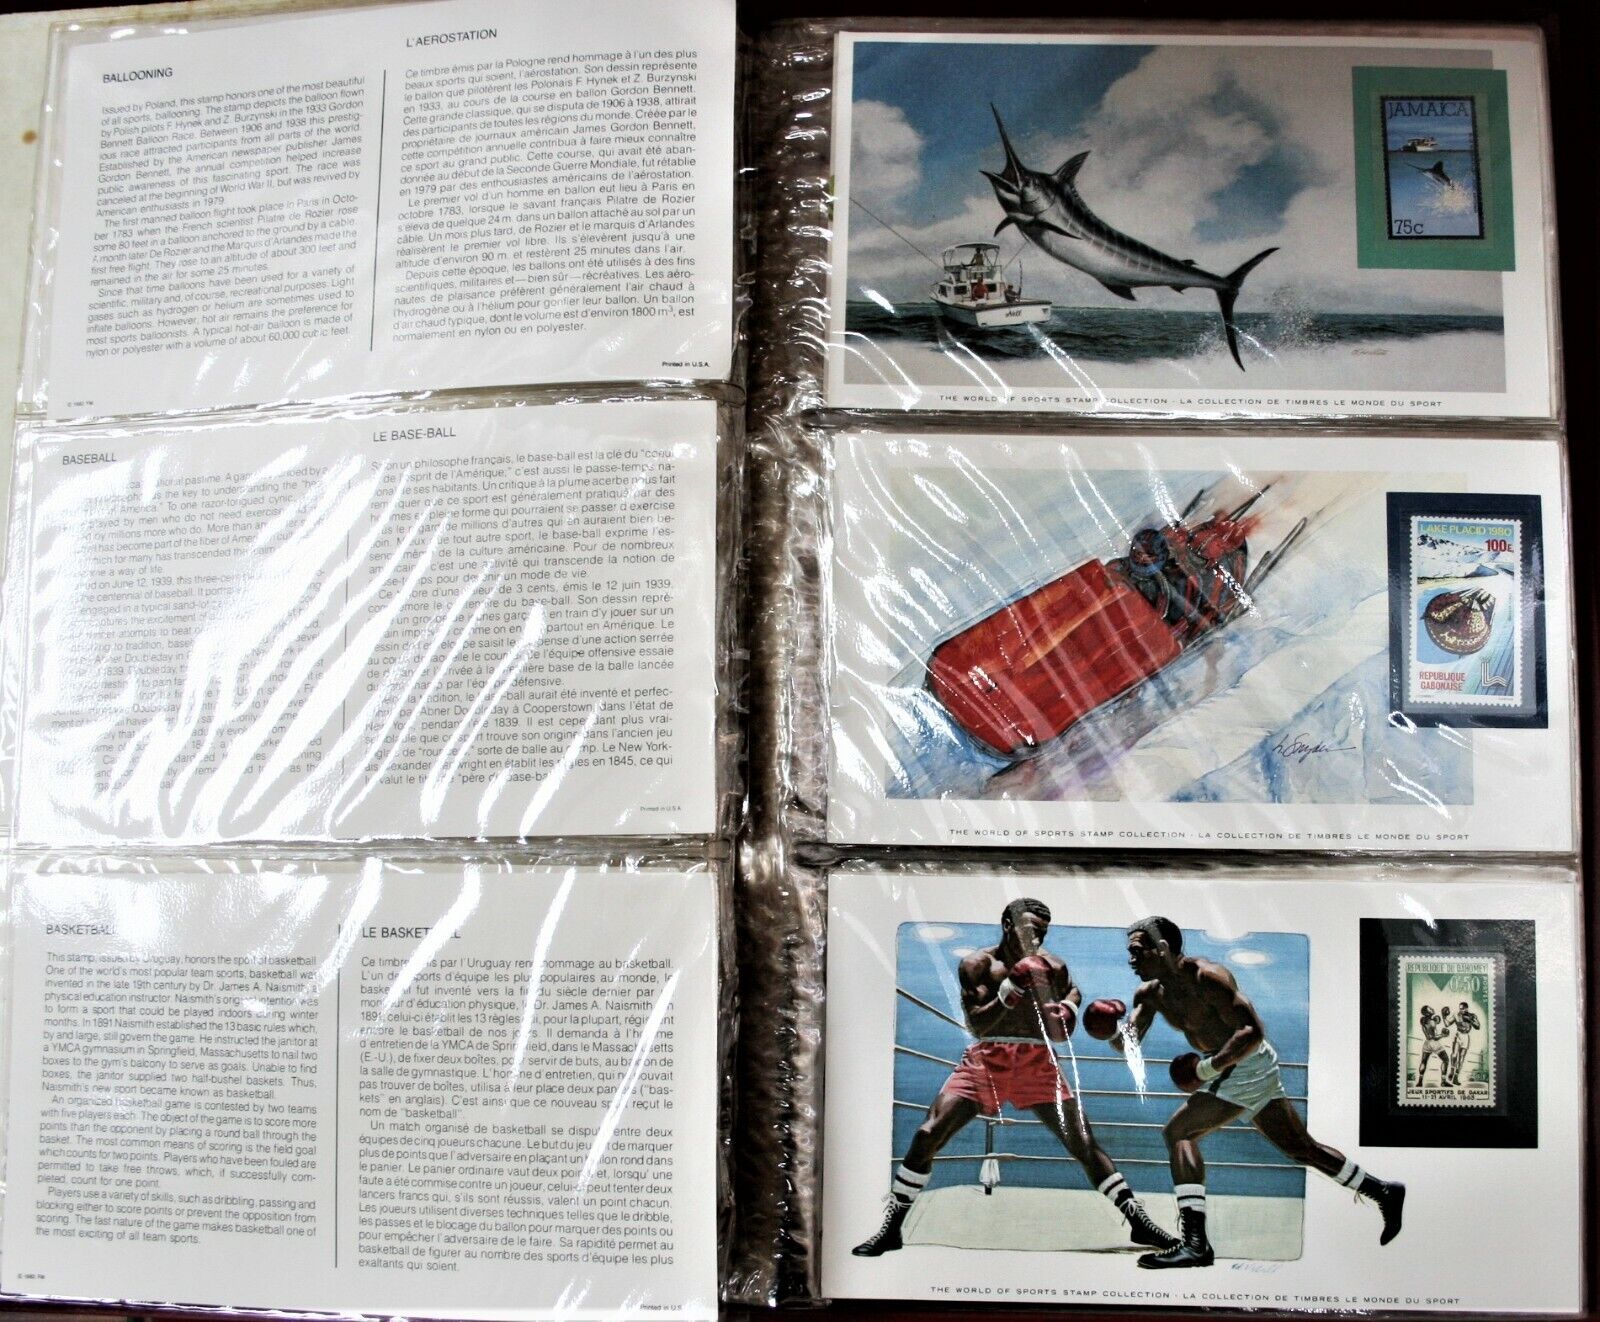 THE WORLD OF SPORTS STAMP COLLETION! 71 PERFECT CONDITION STAMPS! Без бренда - фотография #4